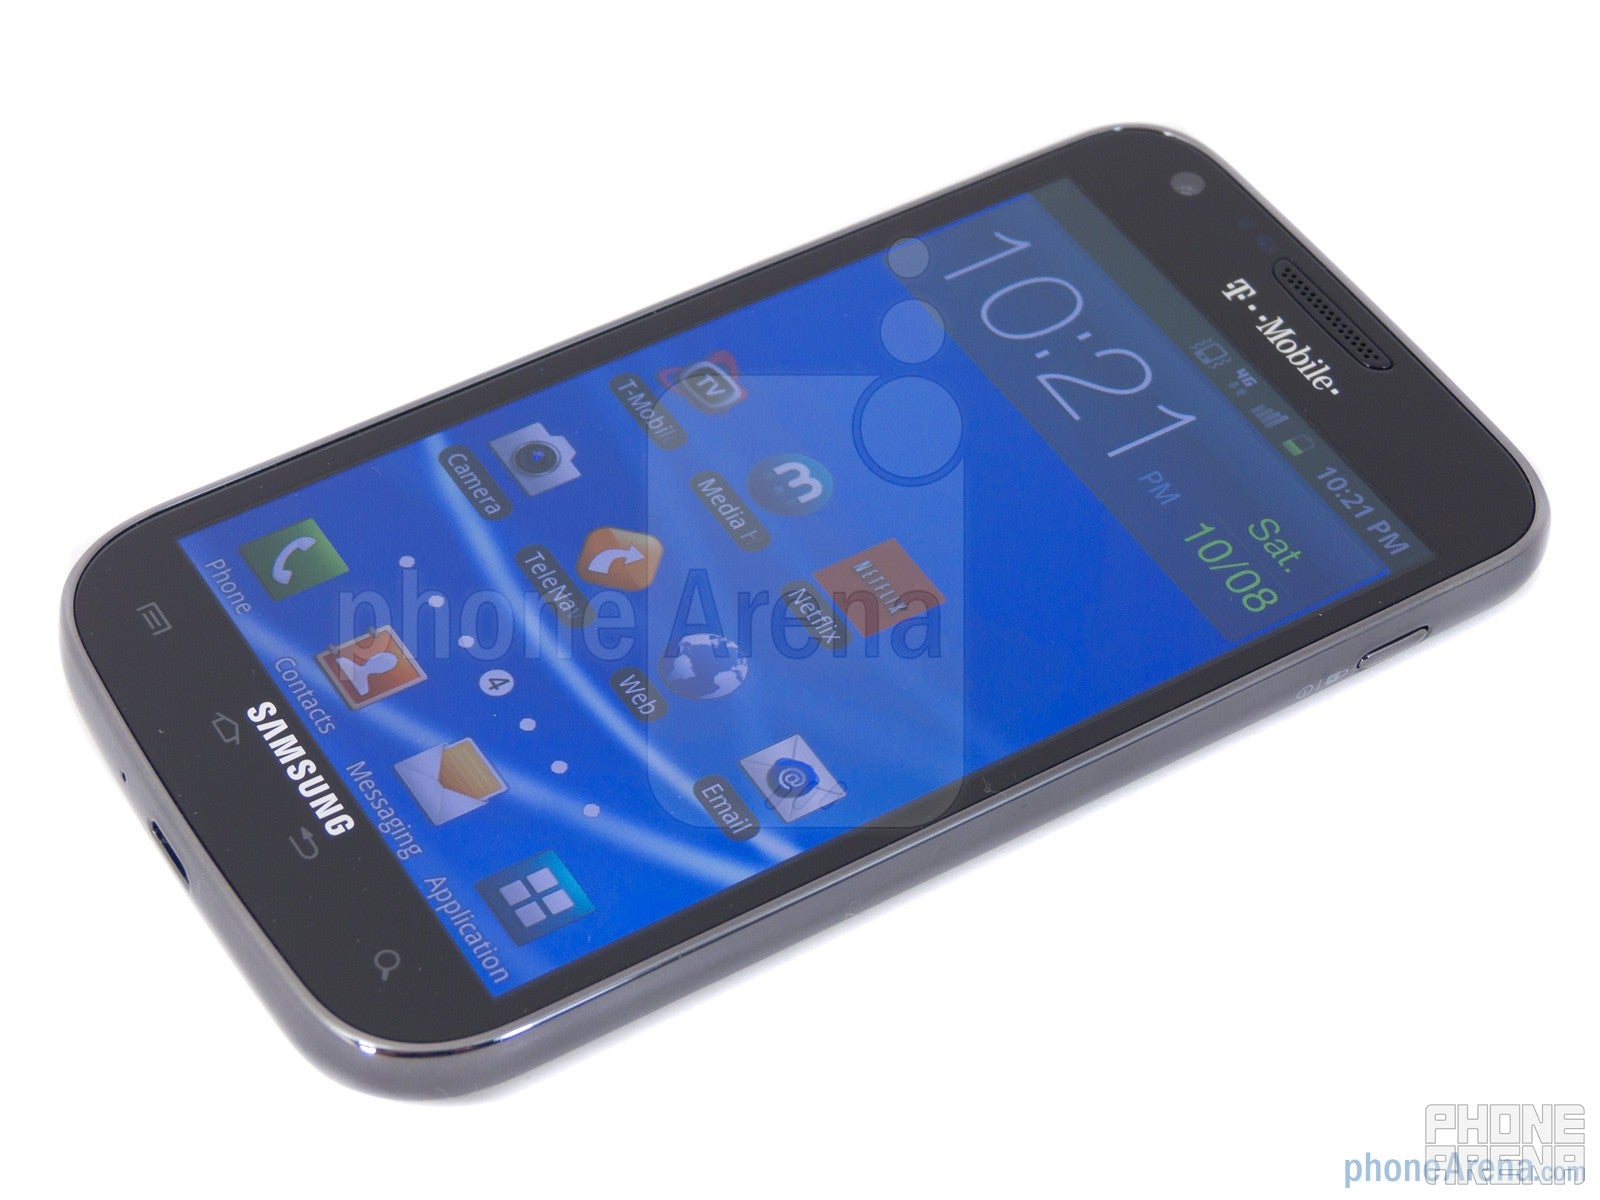 Samsung Galaxy S II T-Mobile Review